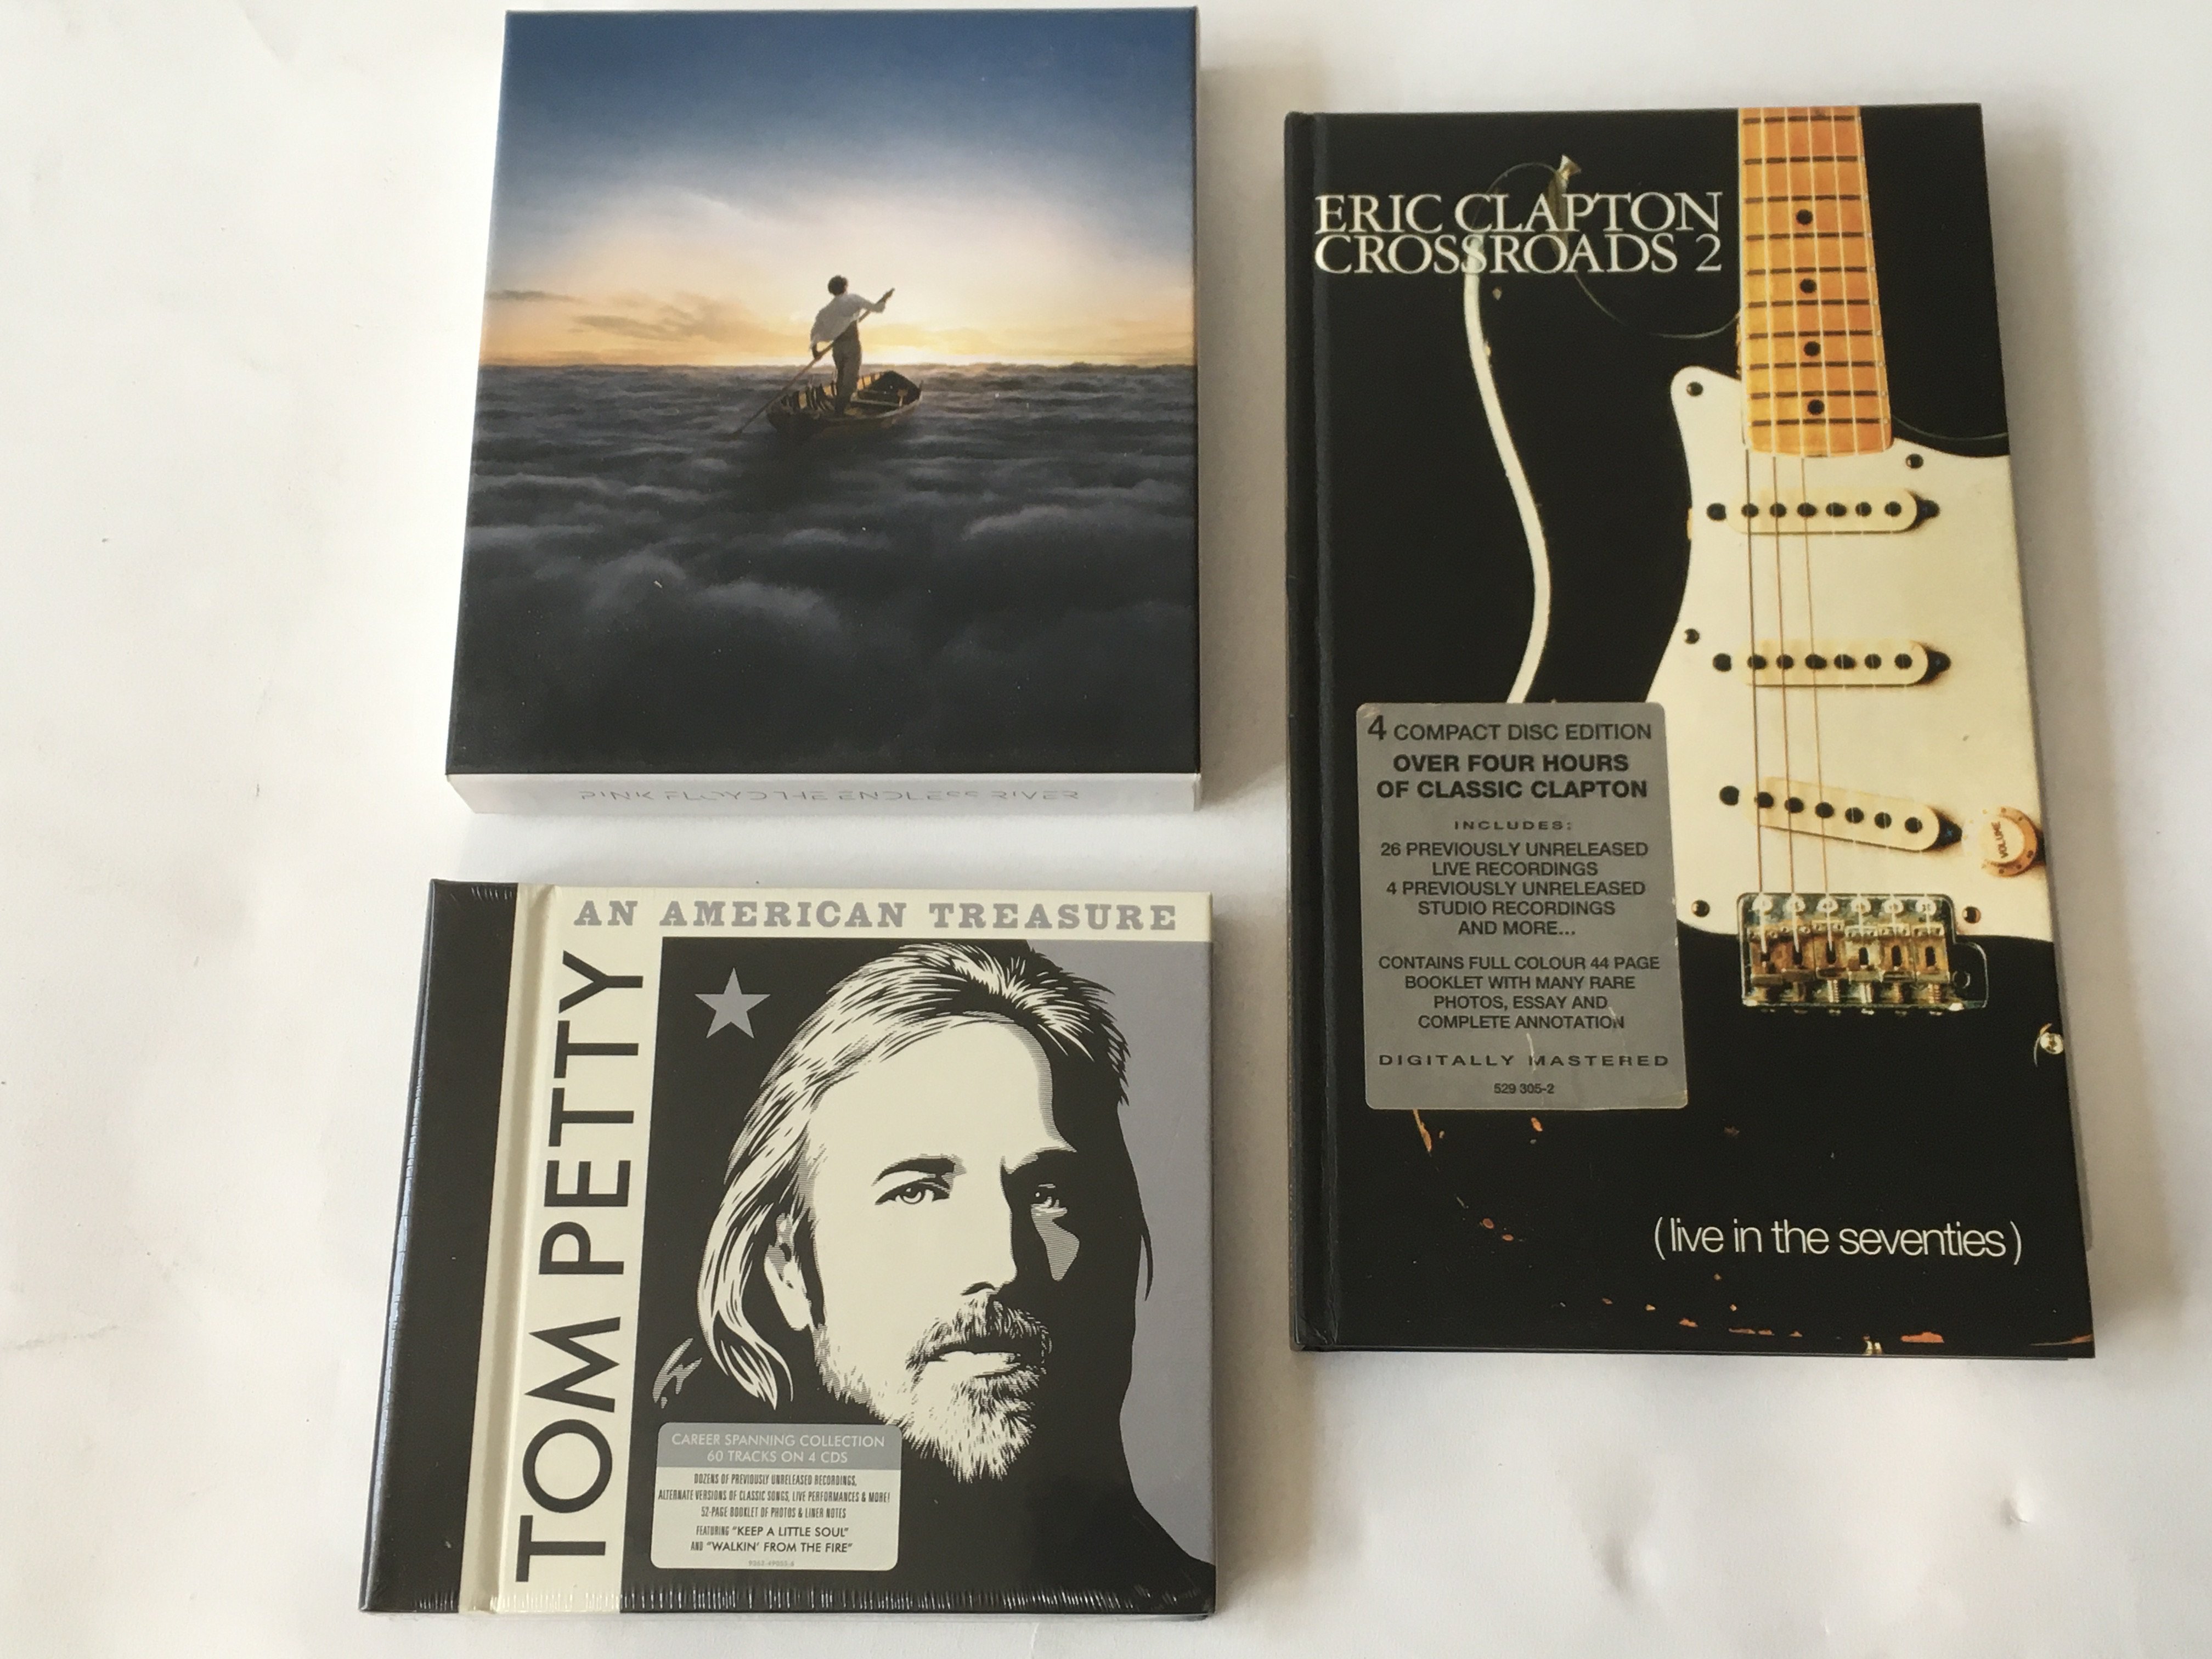 Three CD box sets comprising 'Endless River' by Pink Floyd, 'Crossroads 2' by Eric Clapton and 'An